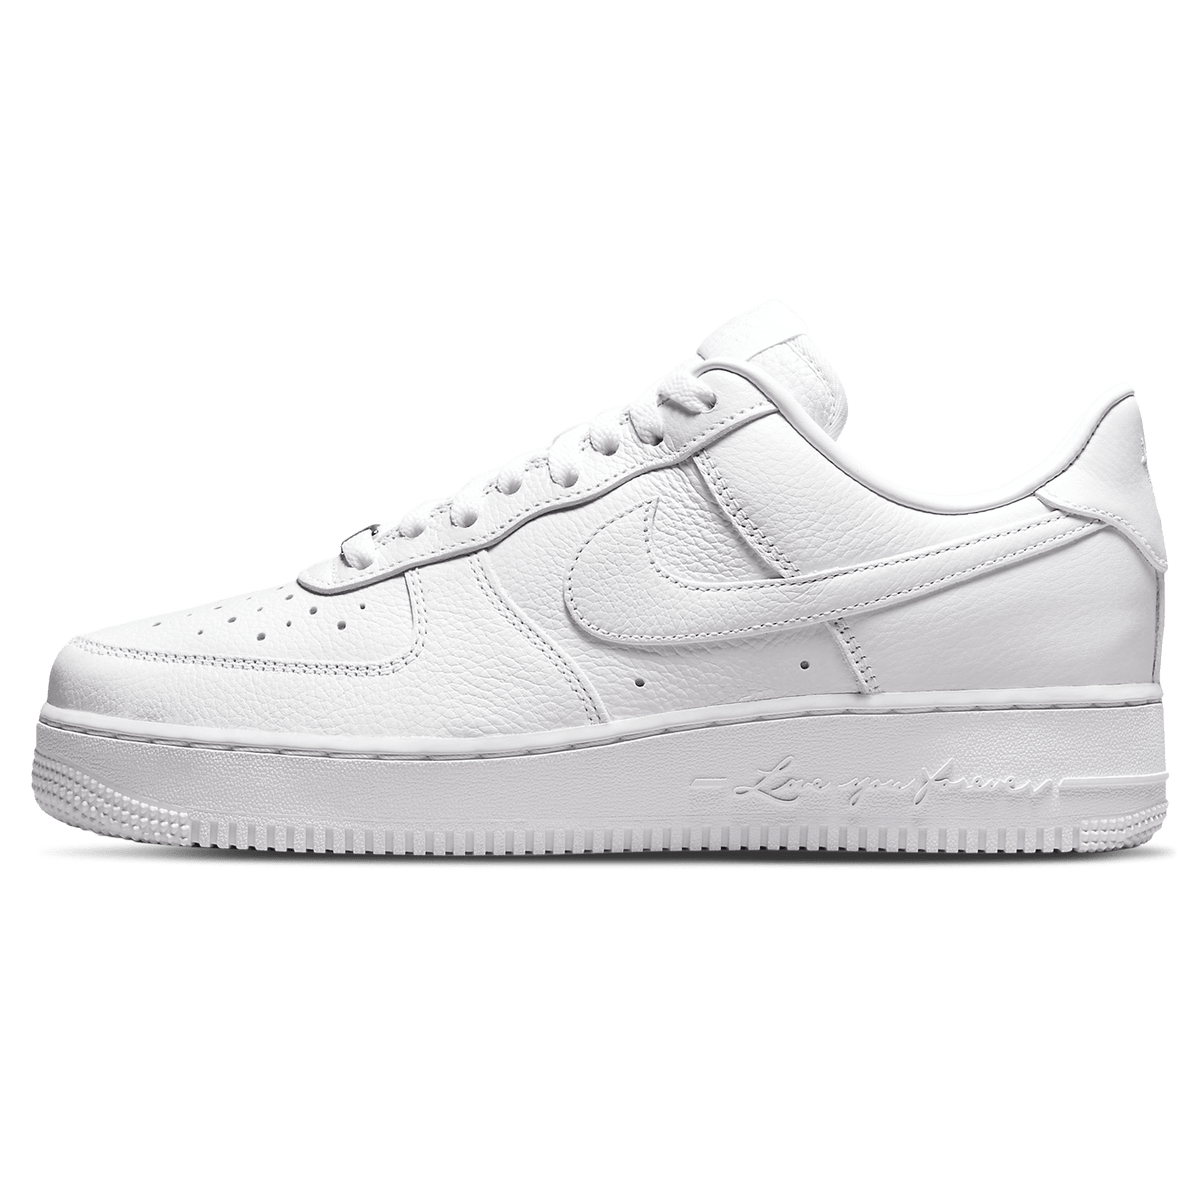 Drake x Nike The Nike Air Force 1 Mid Goes Two-Tone Low 'Certified Lover Boy' - UrlfreezeShops